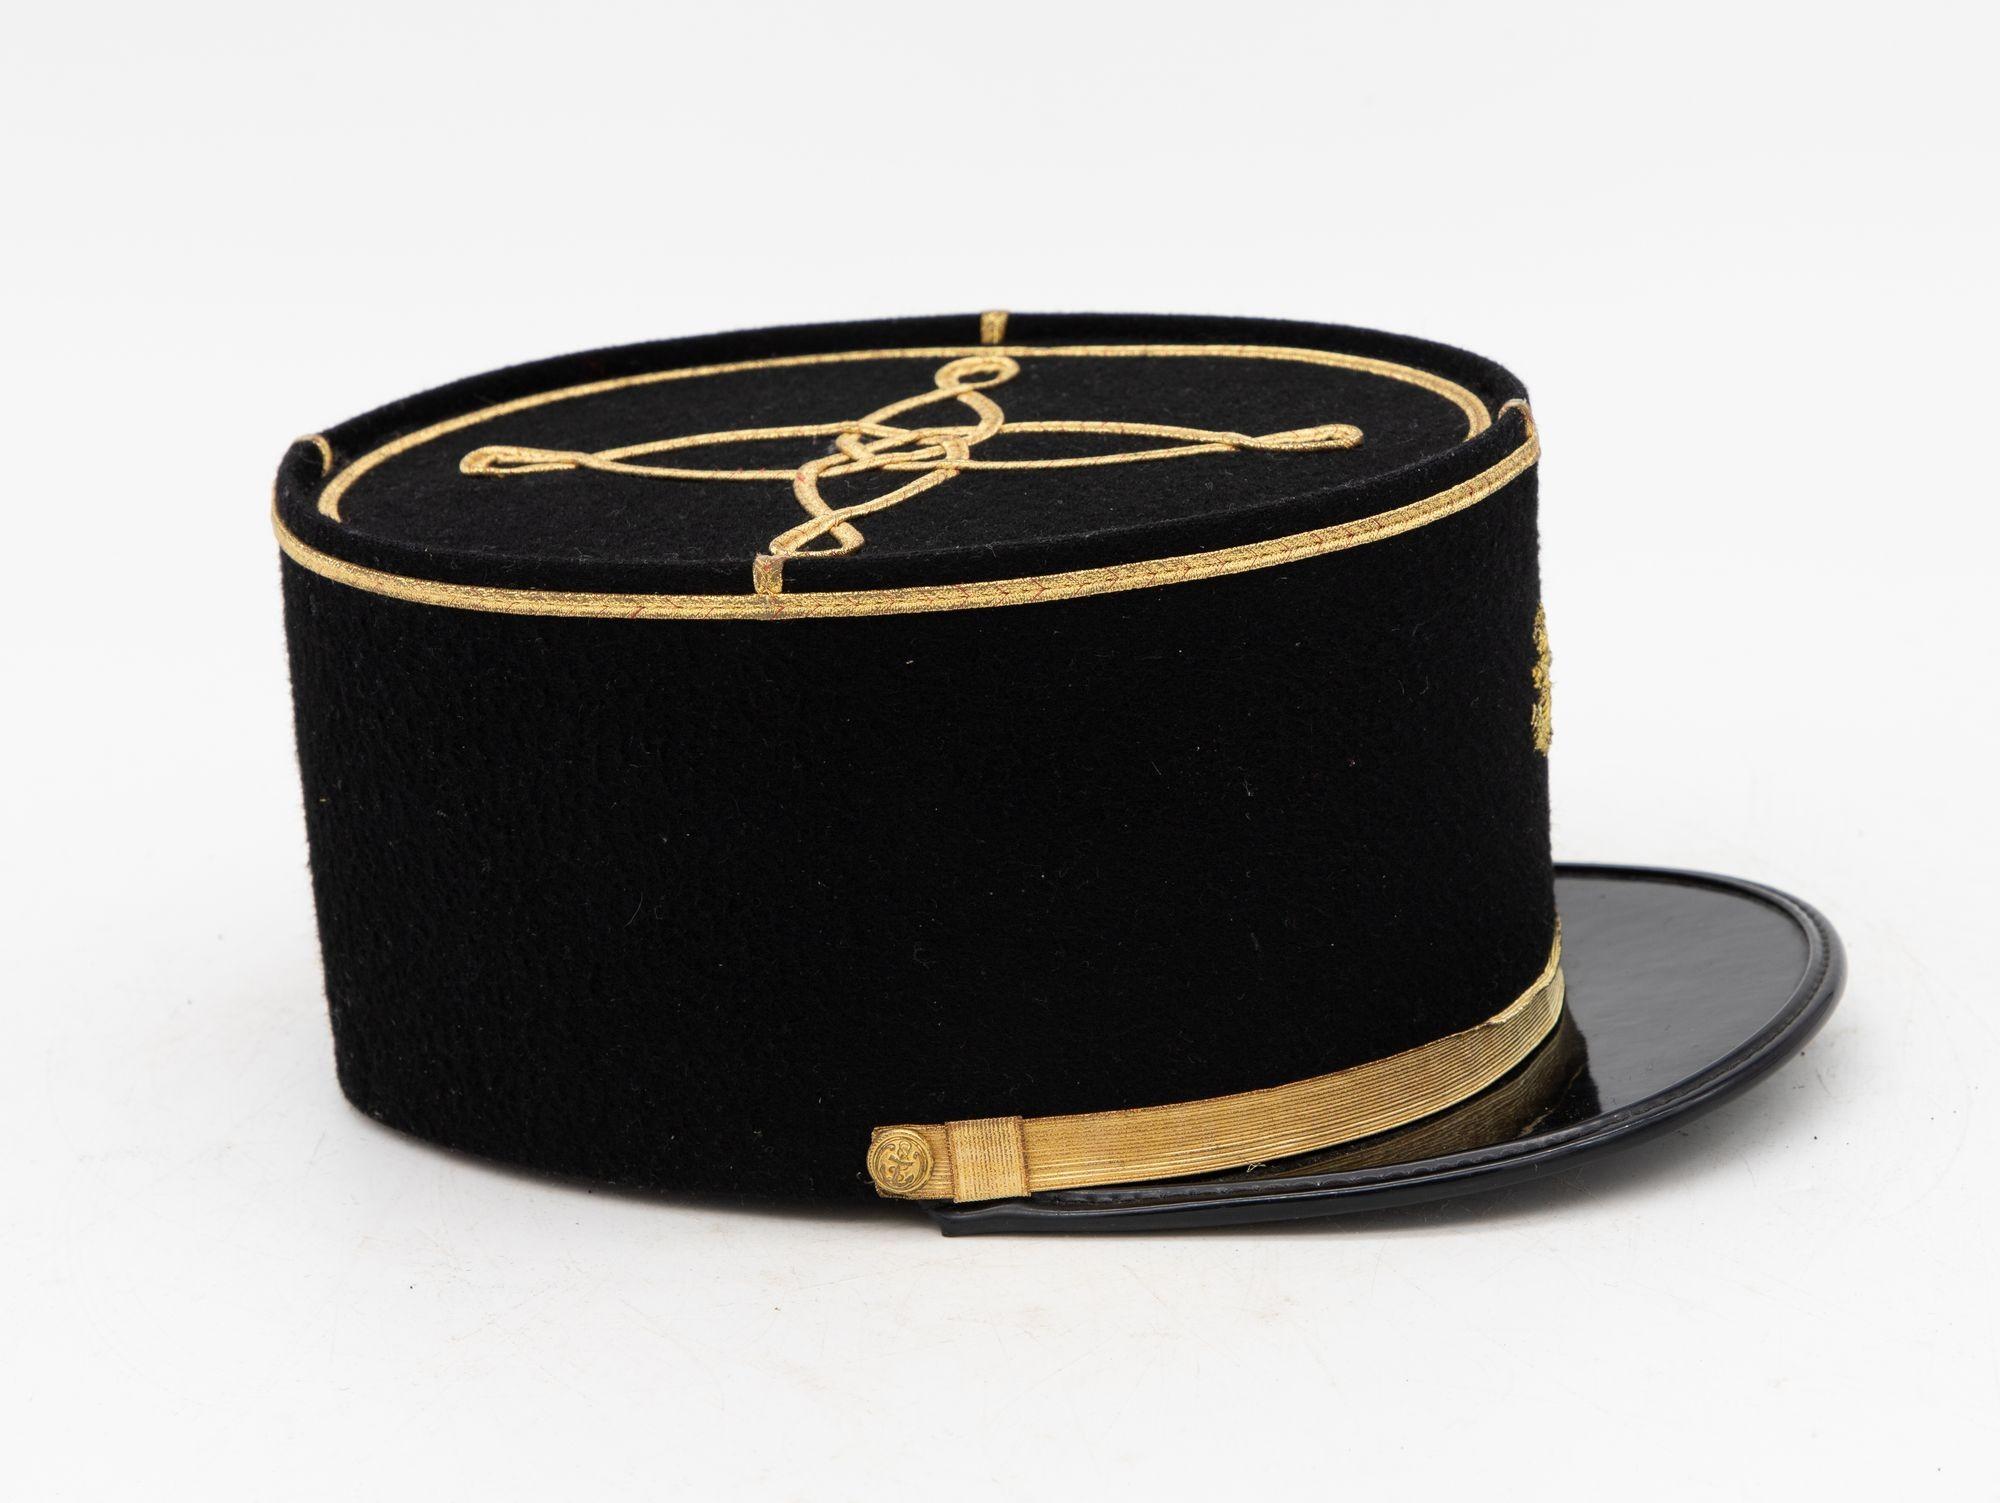 A rare French Military Academy Officer's hat or cap from the 1970s. These special and unique hats are part of the uniform of students studying to become officers in the French Military. This cap features a black leather brim on black felt with a